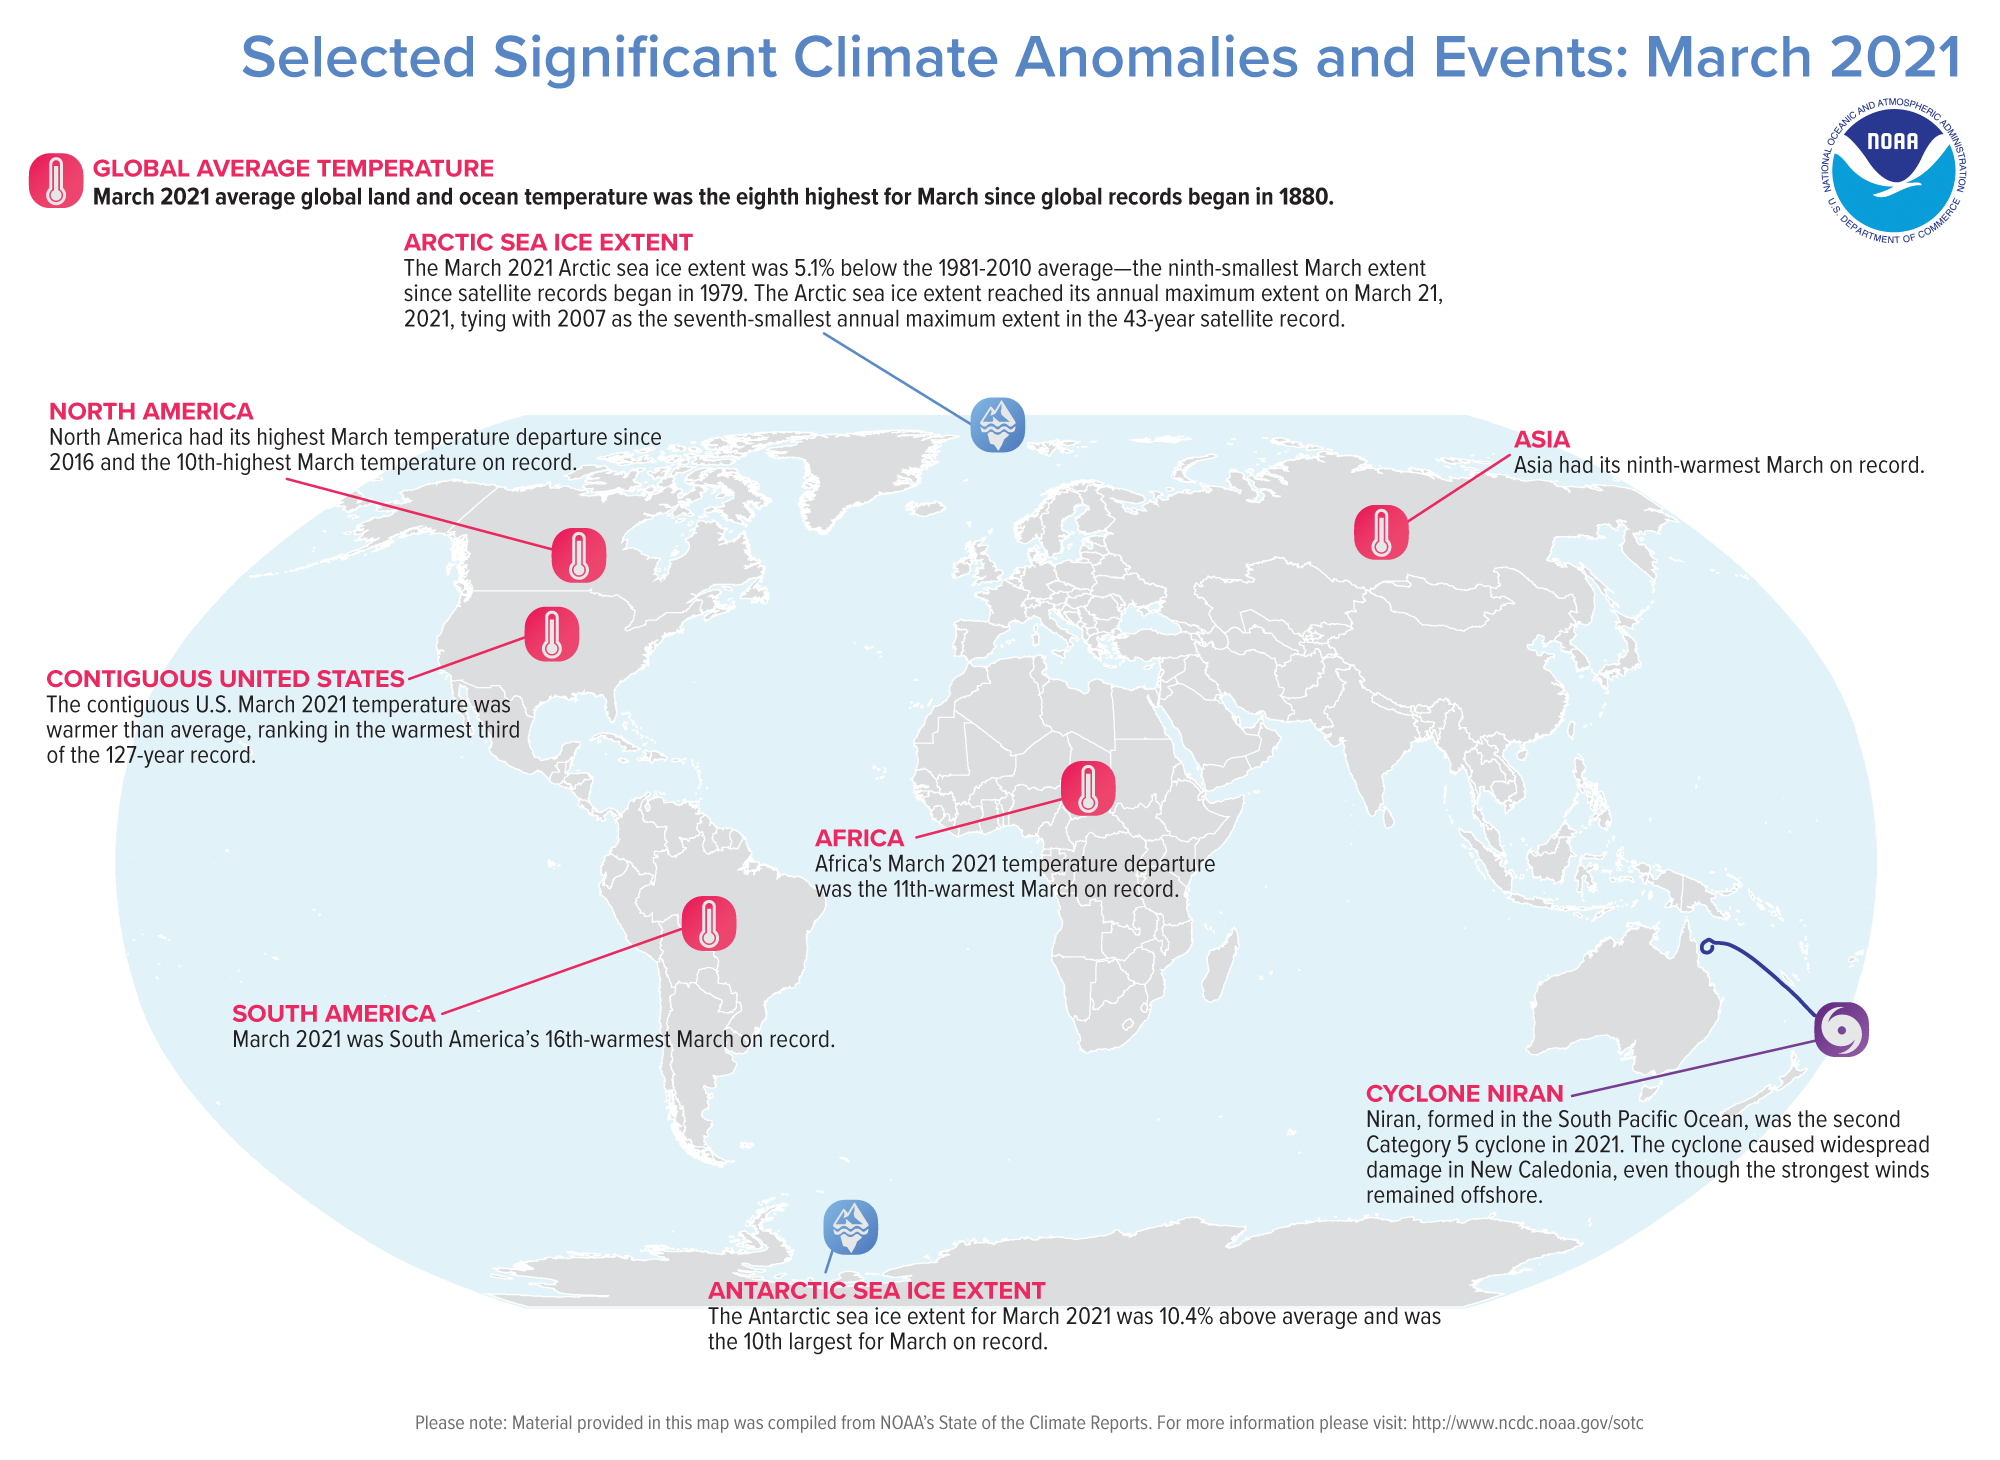 An annotated map of the world plotted with some of the most significant climate events that occurred during March 2021. Please see the story below as well as more details in the report summary from NOAA NCEI at http://bit.ly/Global202103.